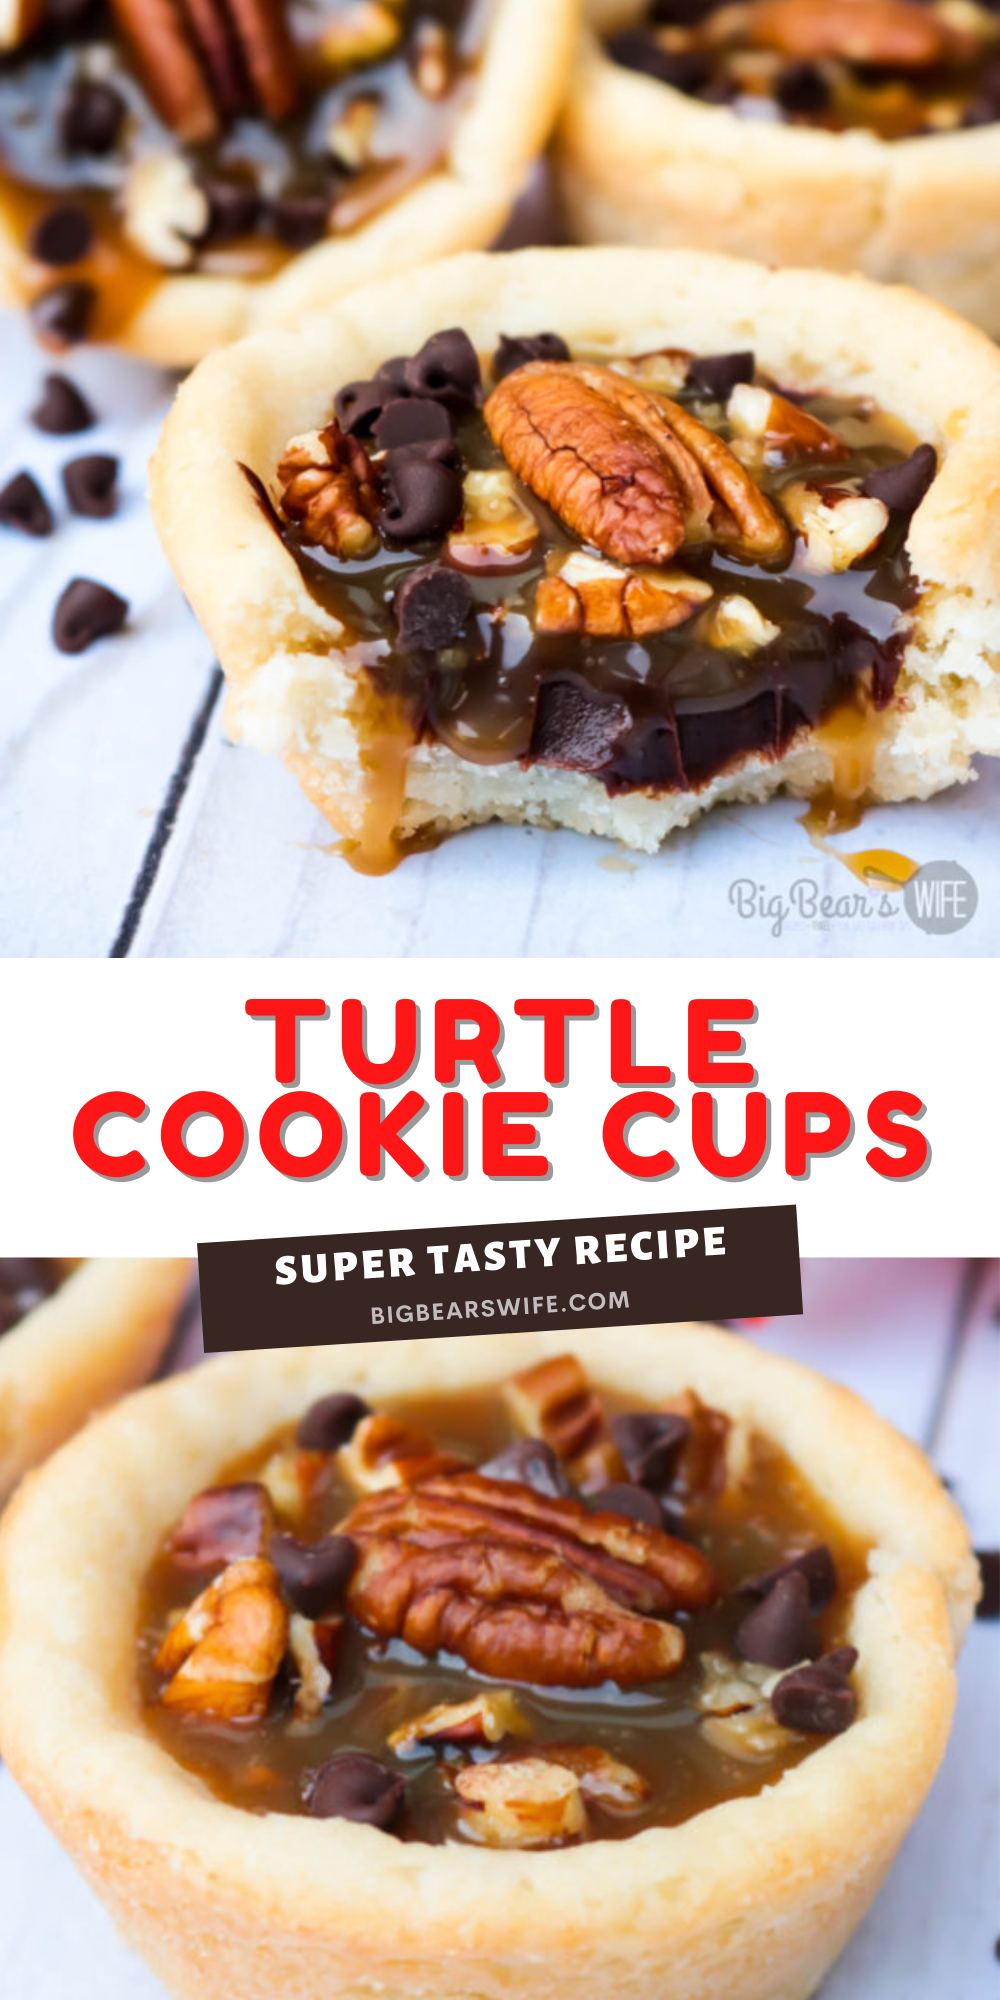 Easy, portable and delicious – these Turtle Cookie Cups are a dessert for any occasion. These delicious sugar cookie cups are filled with a homemade chocolate ganache, a layer of chopped pecans and topped with a sweet caramel sauce for a tasty, must-try treat. via @bigbearswife